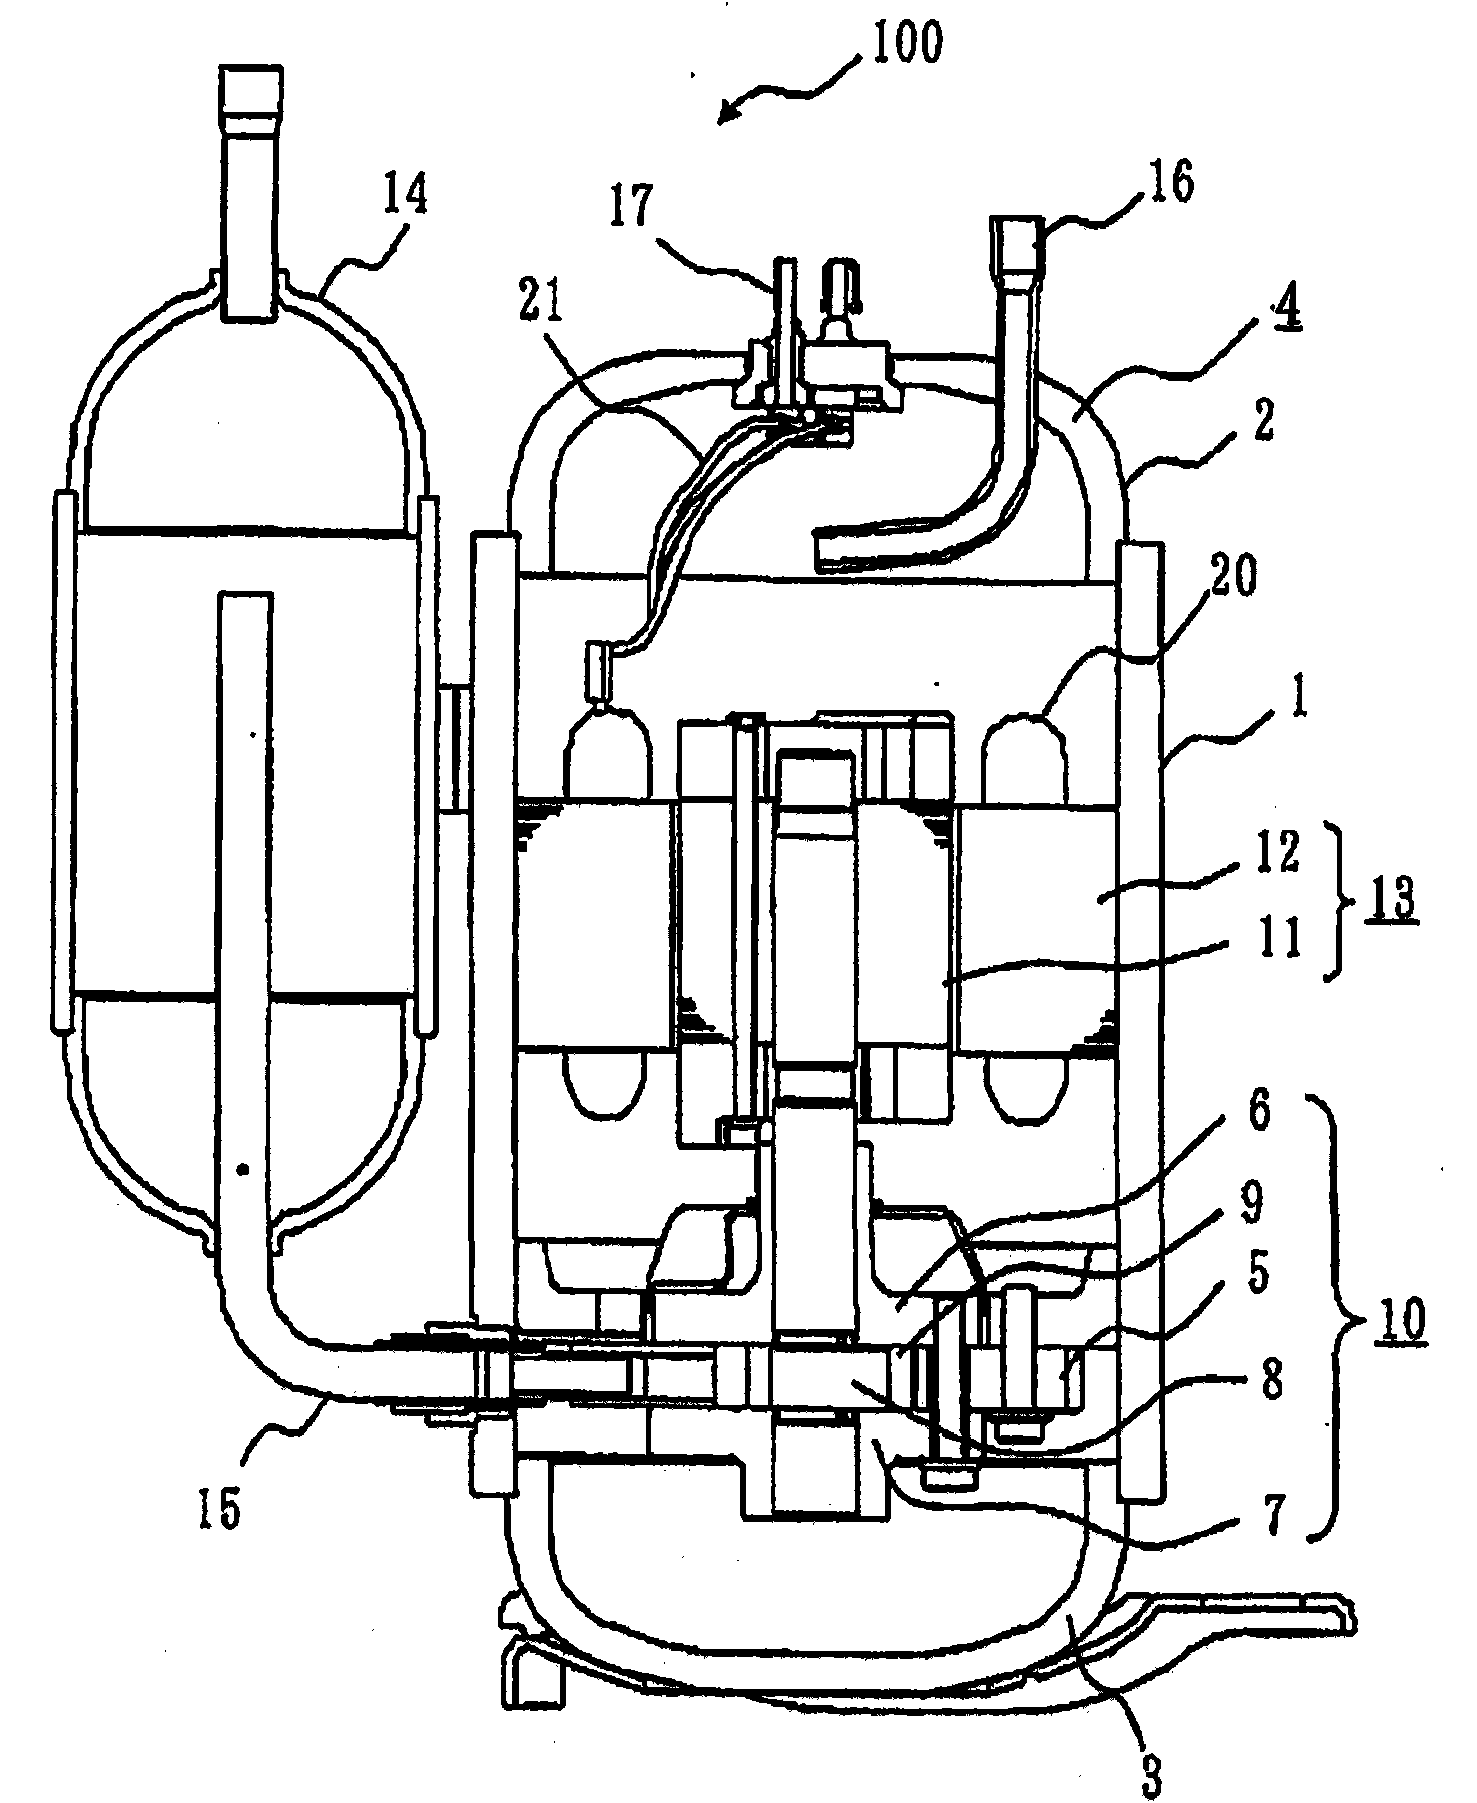 Electric motor for compressor, compressor, and freezing cycle device